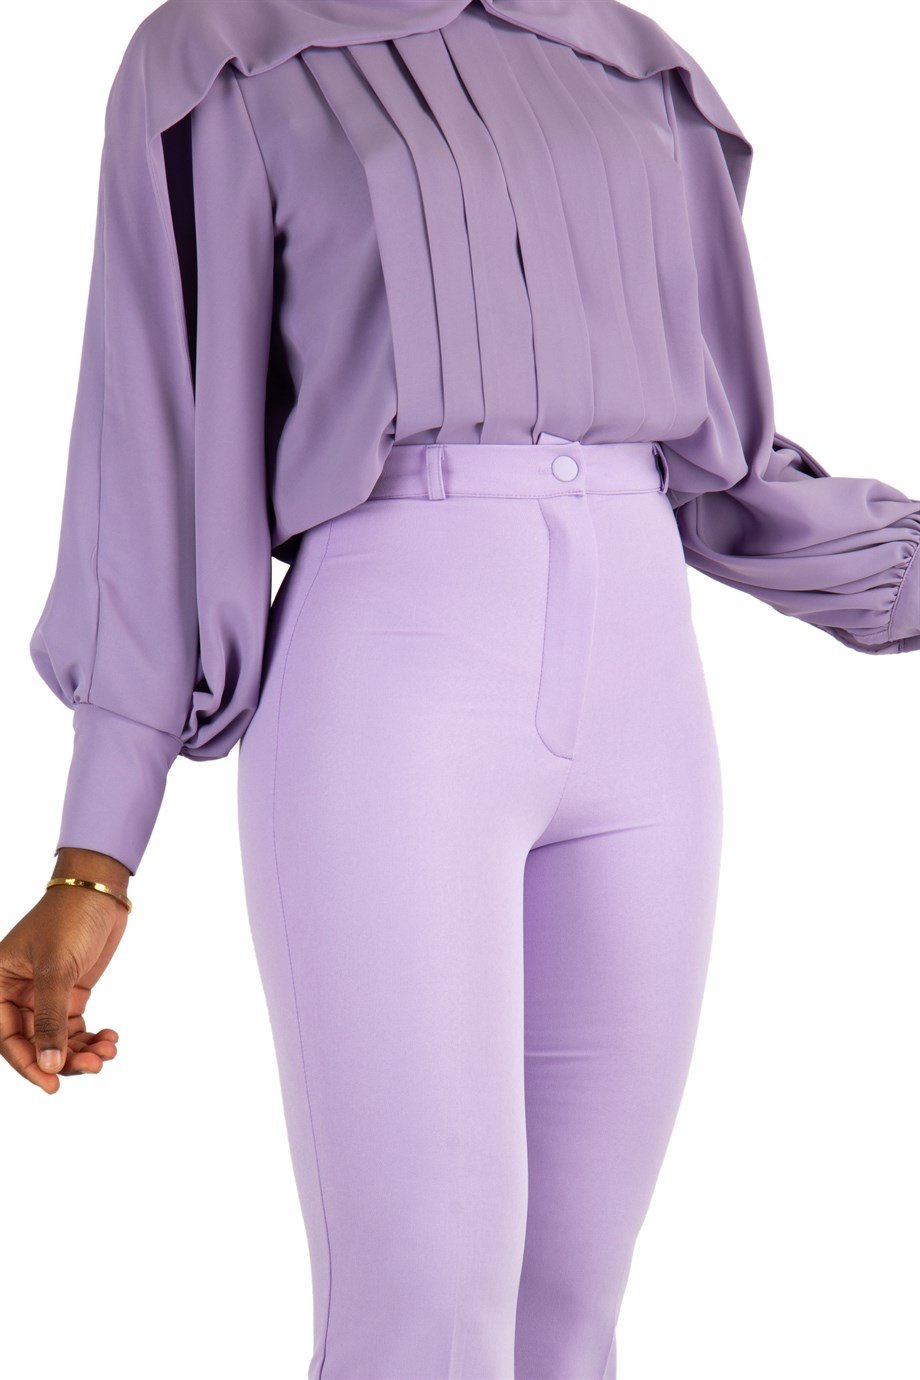 Classic Trouser Office Pant - Lilac - Wholesale Womens Clothing